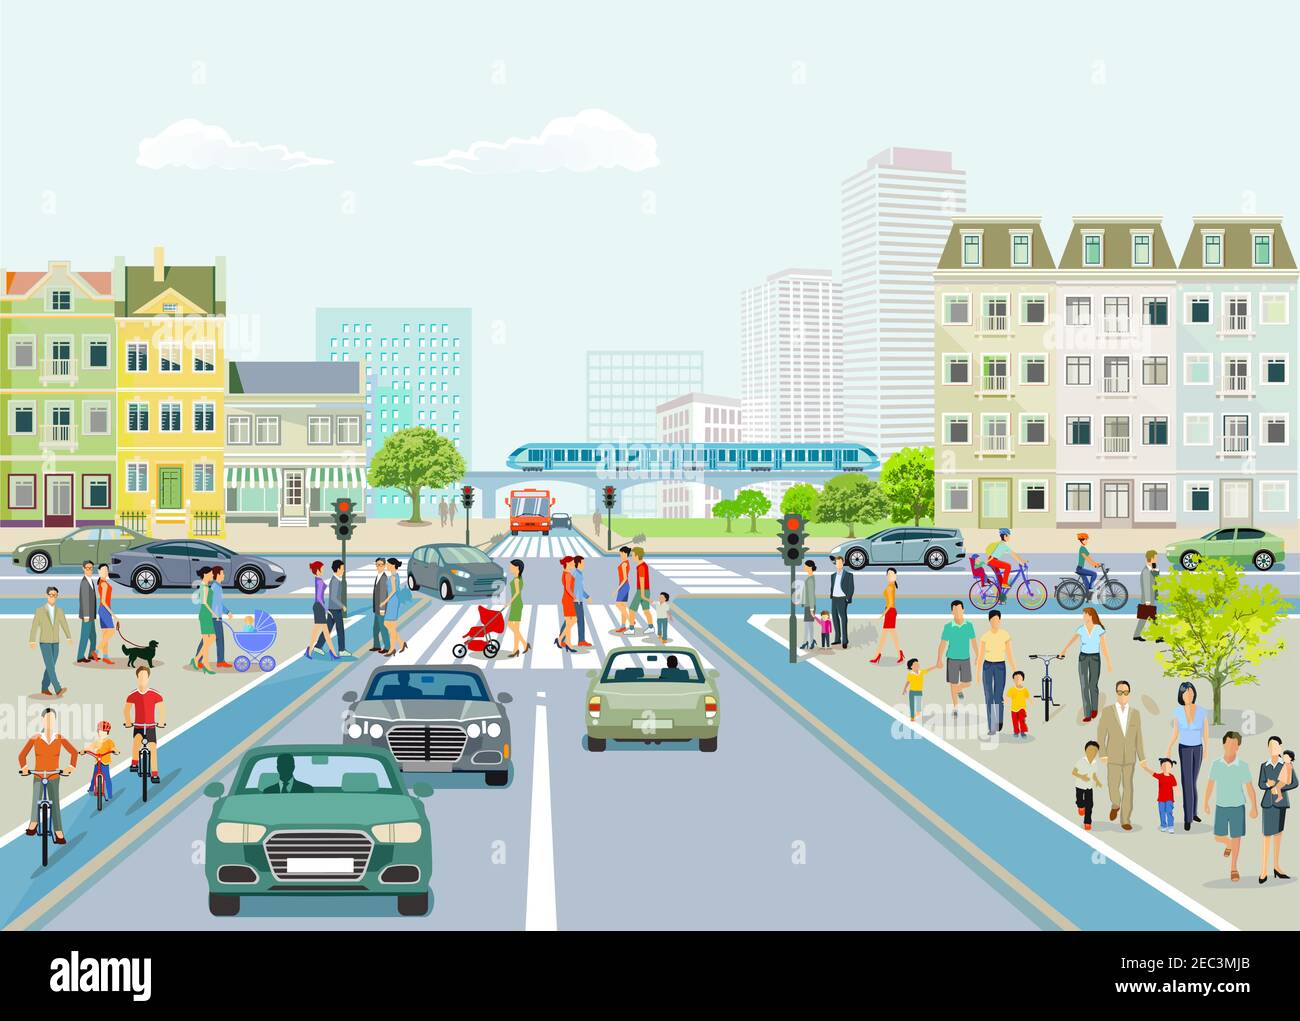 City with road traffic, skyscrapers, apartment buildings and pedestrians on the sidewalk, illustration Stock Vector